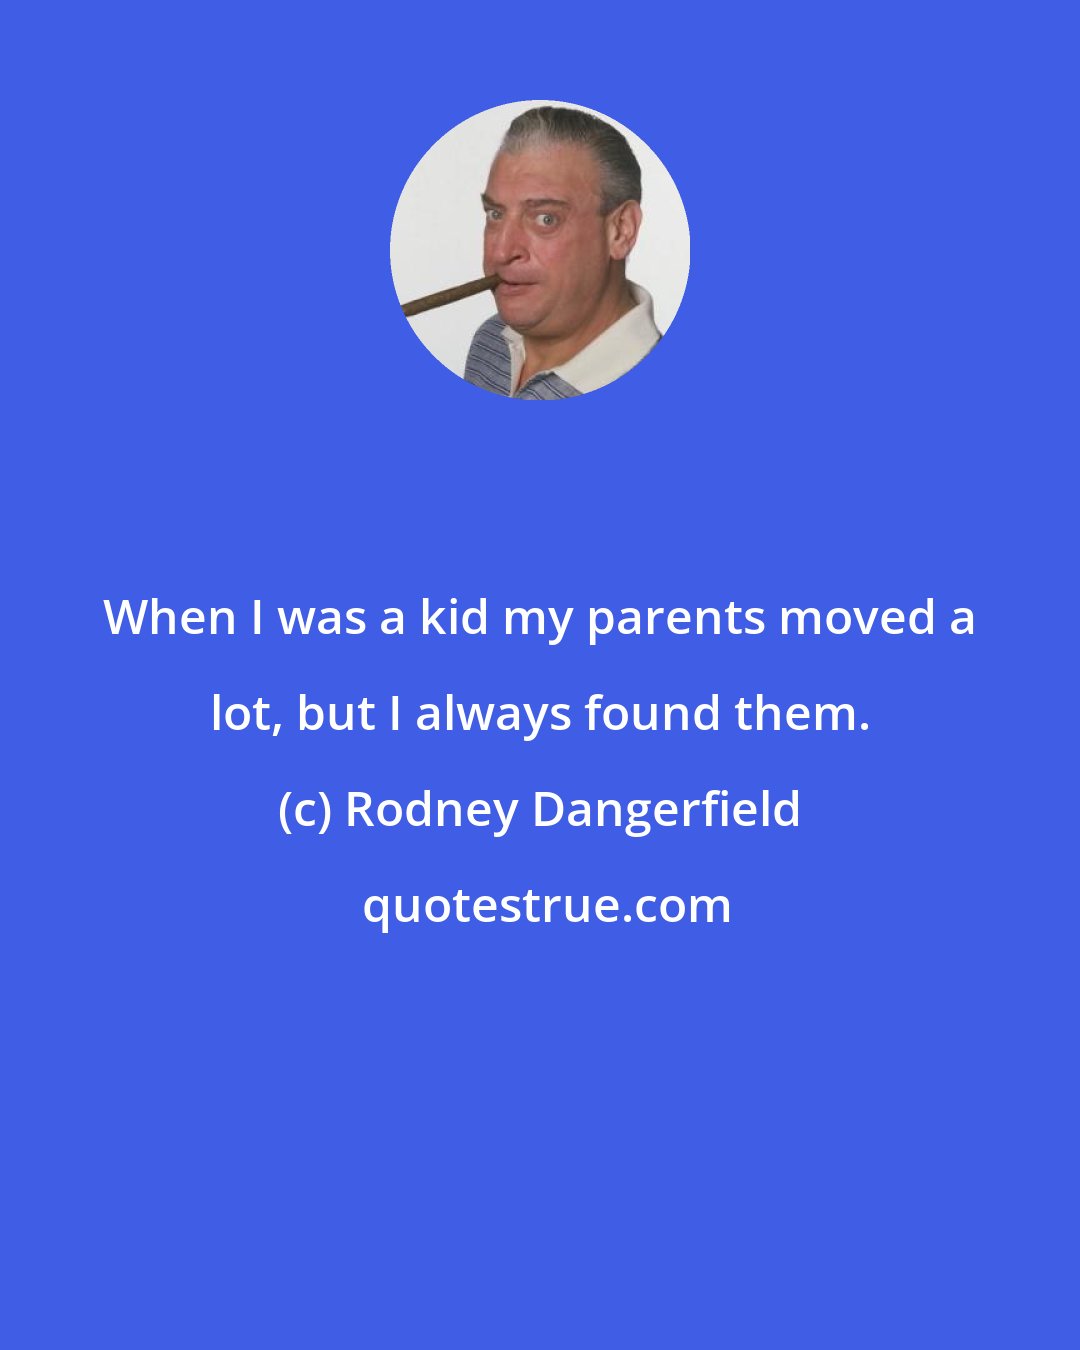 Rodney Dangerfield: When I was a kid my parents moved a lot, but I always found them.